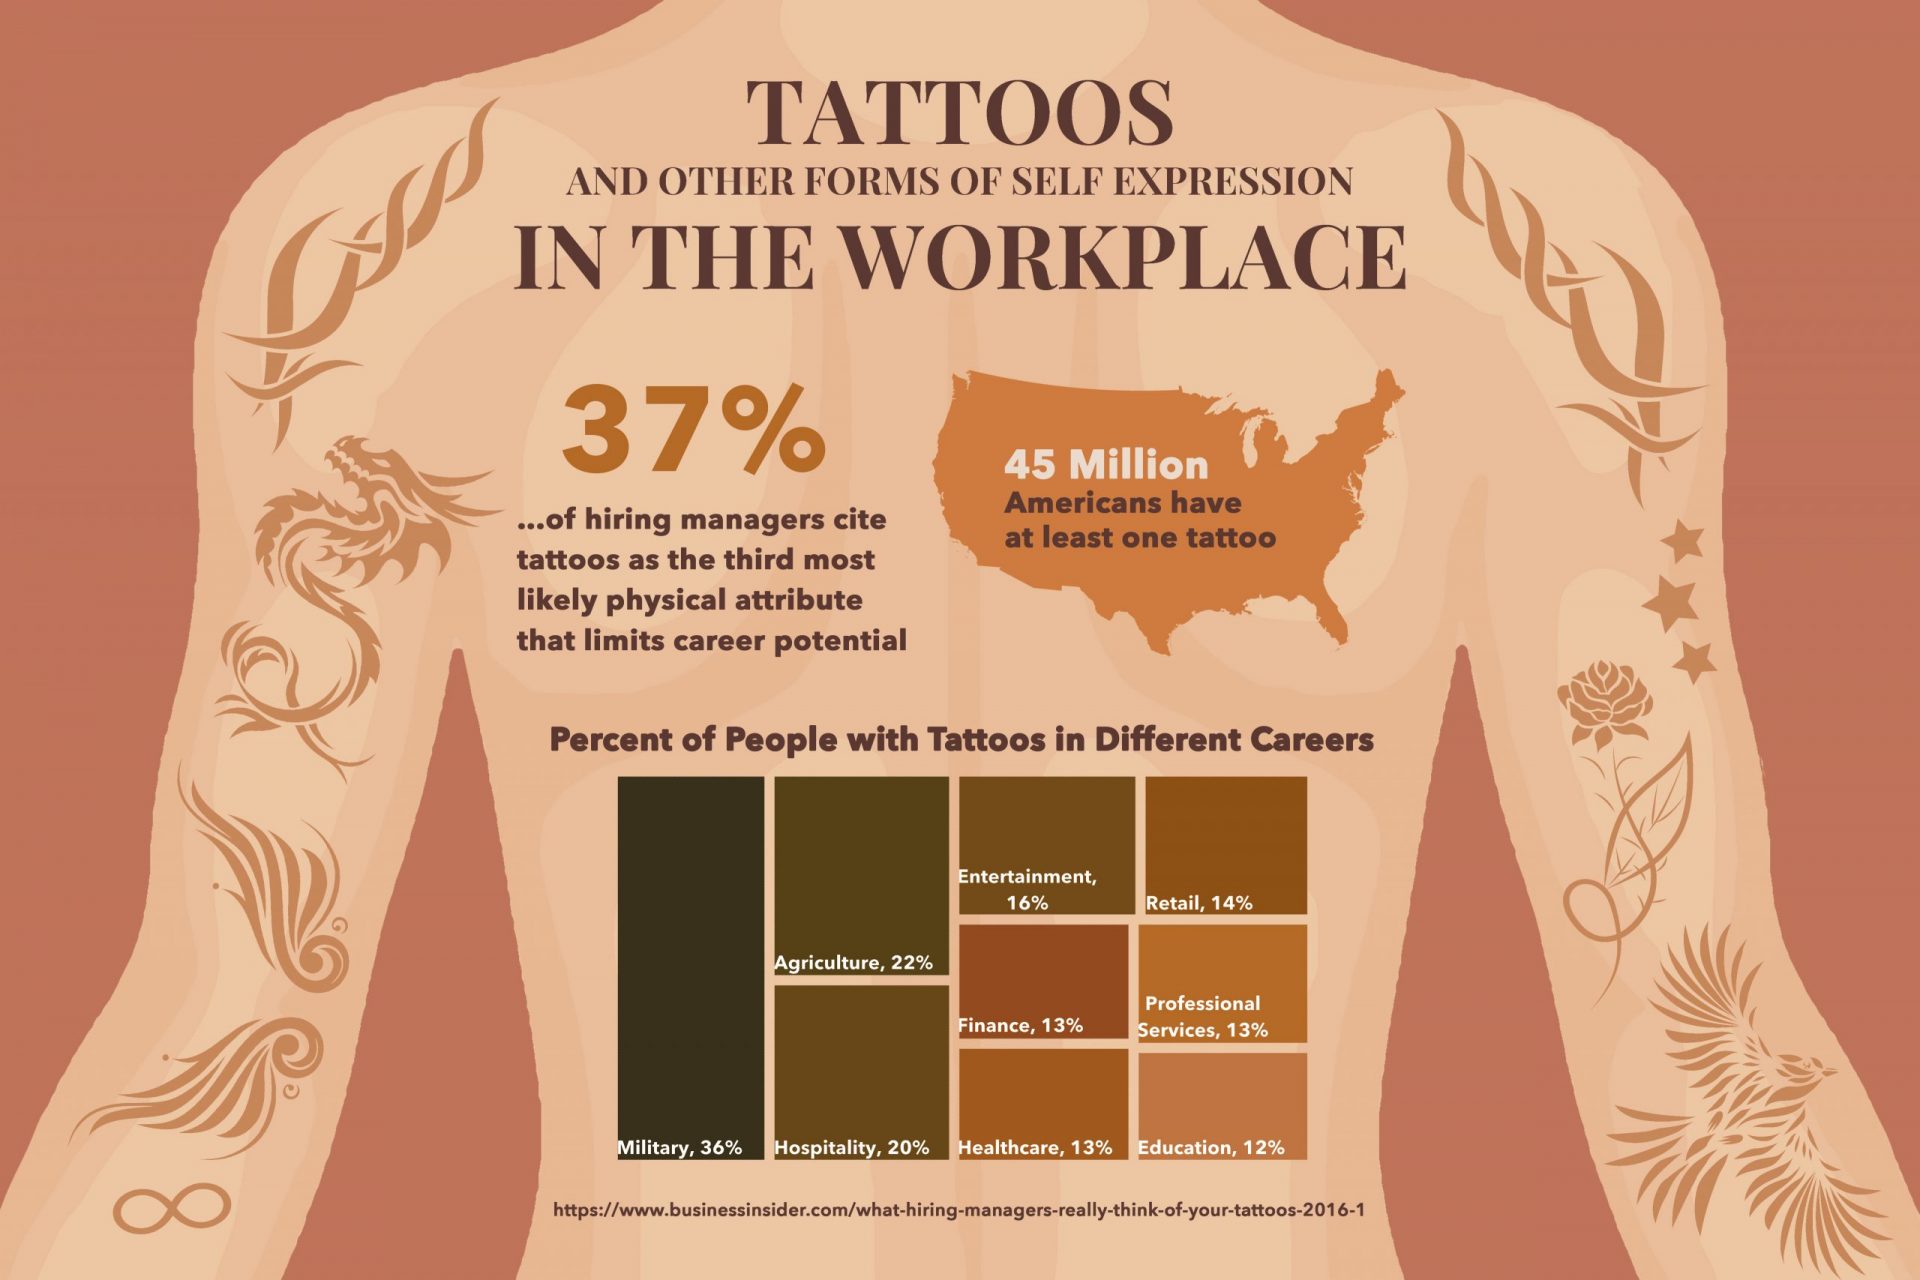 OPINION: Tattoos allow for self-expression in the workplace – TommieMedia